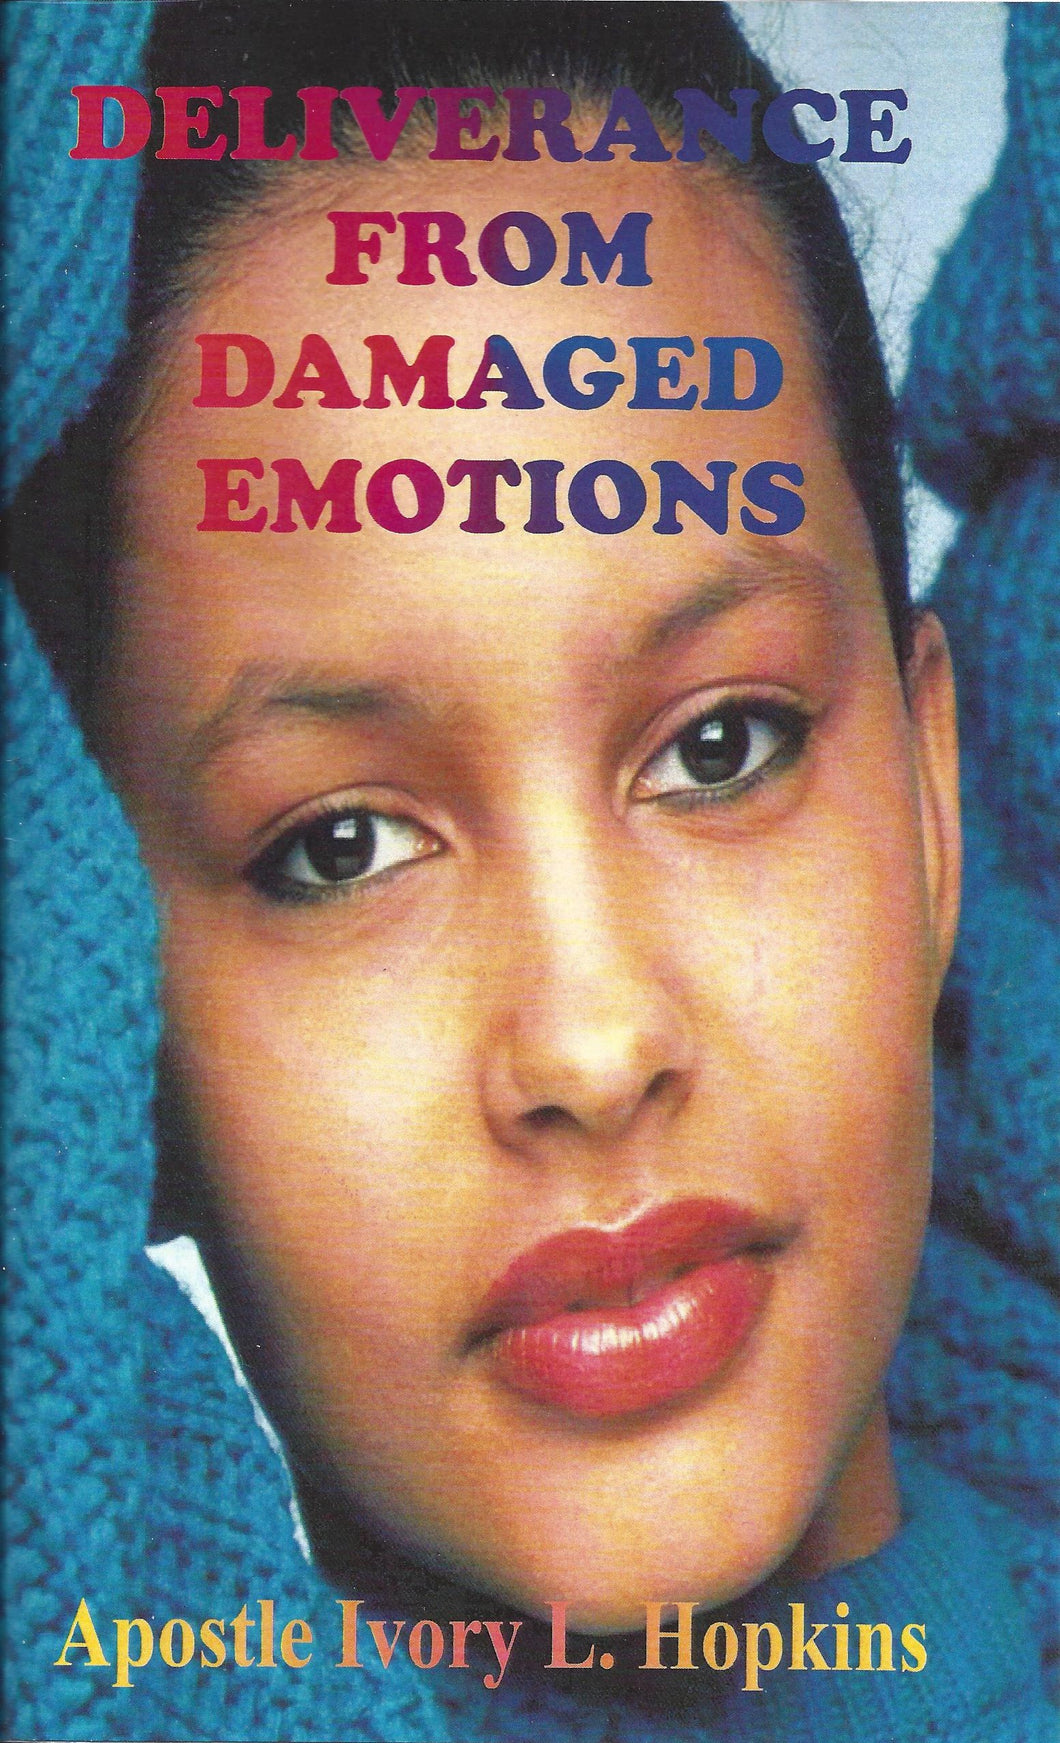 MP3 – 82 – Deliverance from damaged emotions the warfare Spirit, Soul, Body and Demons